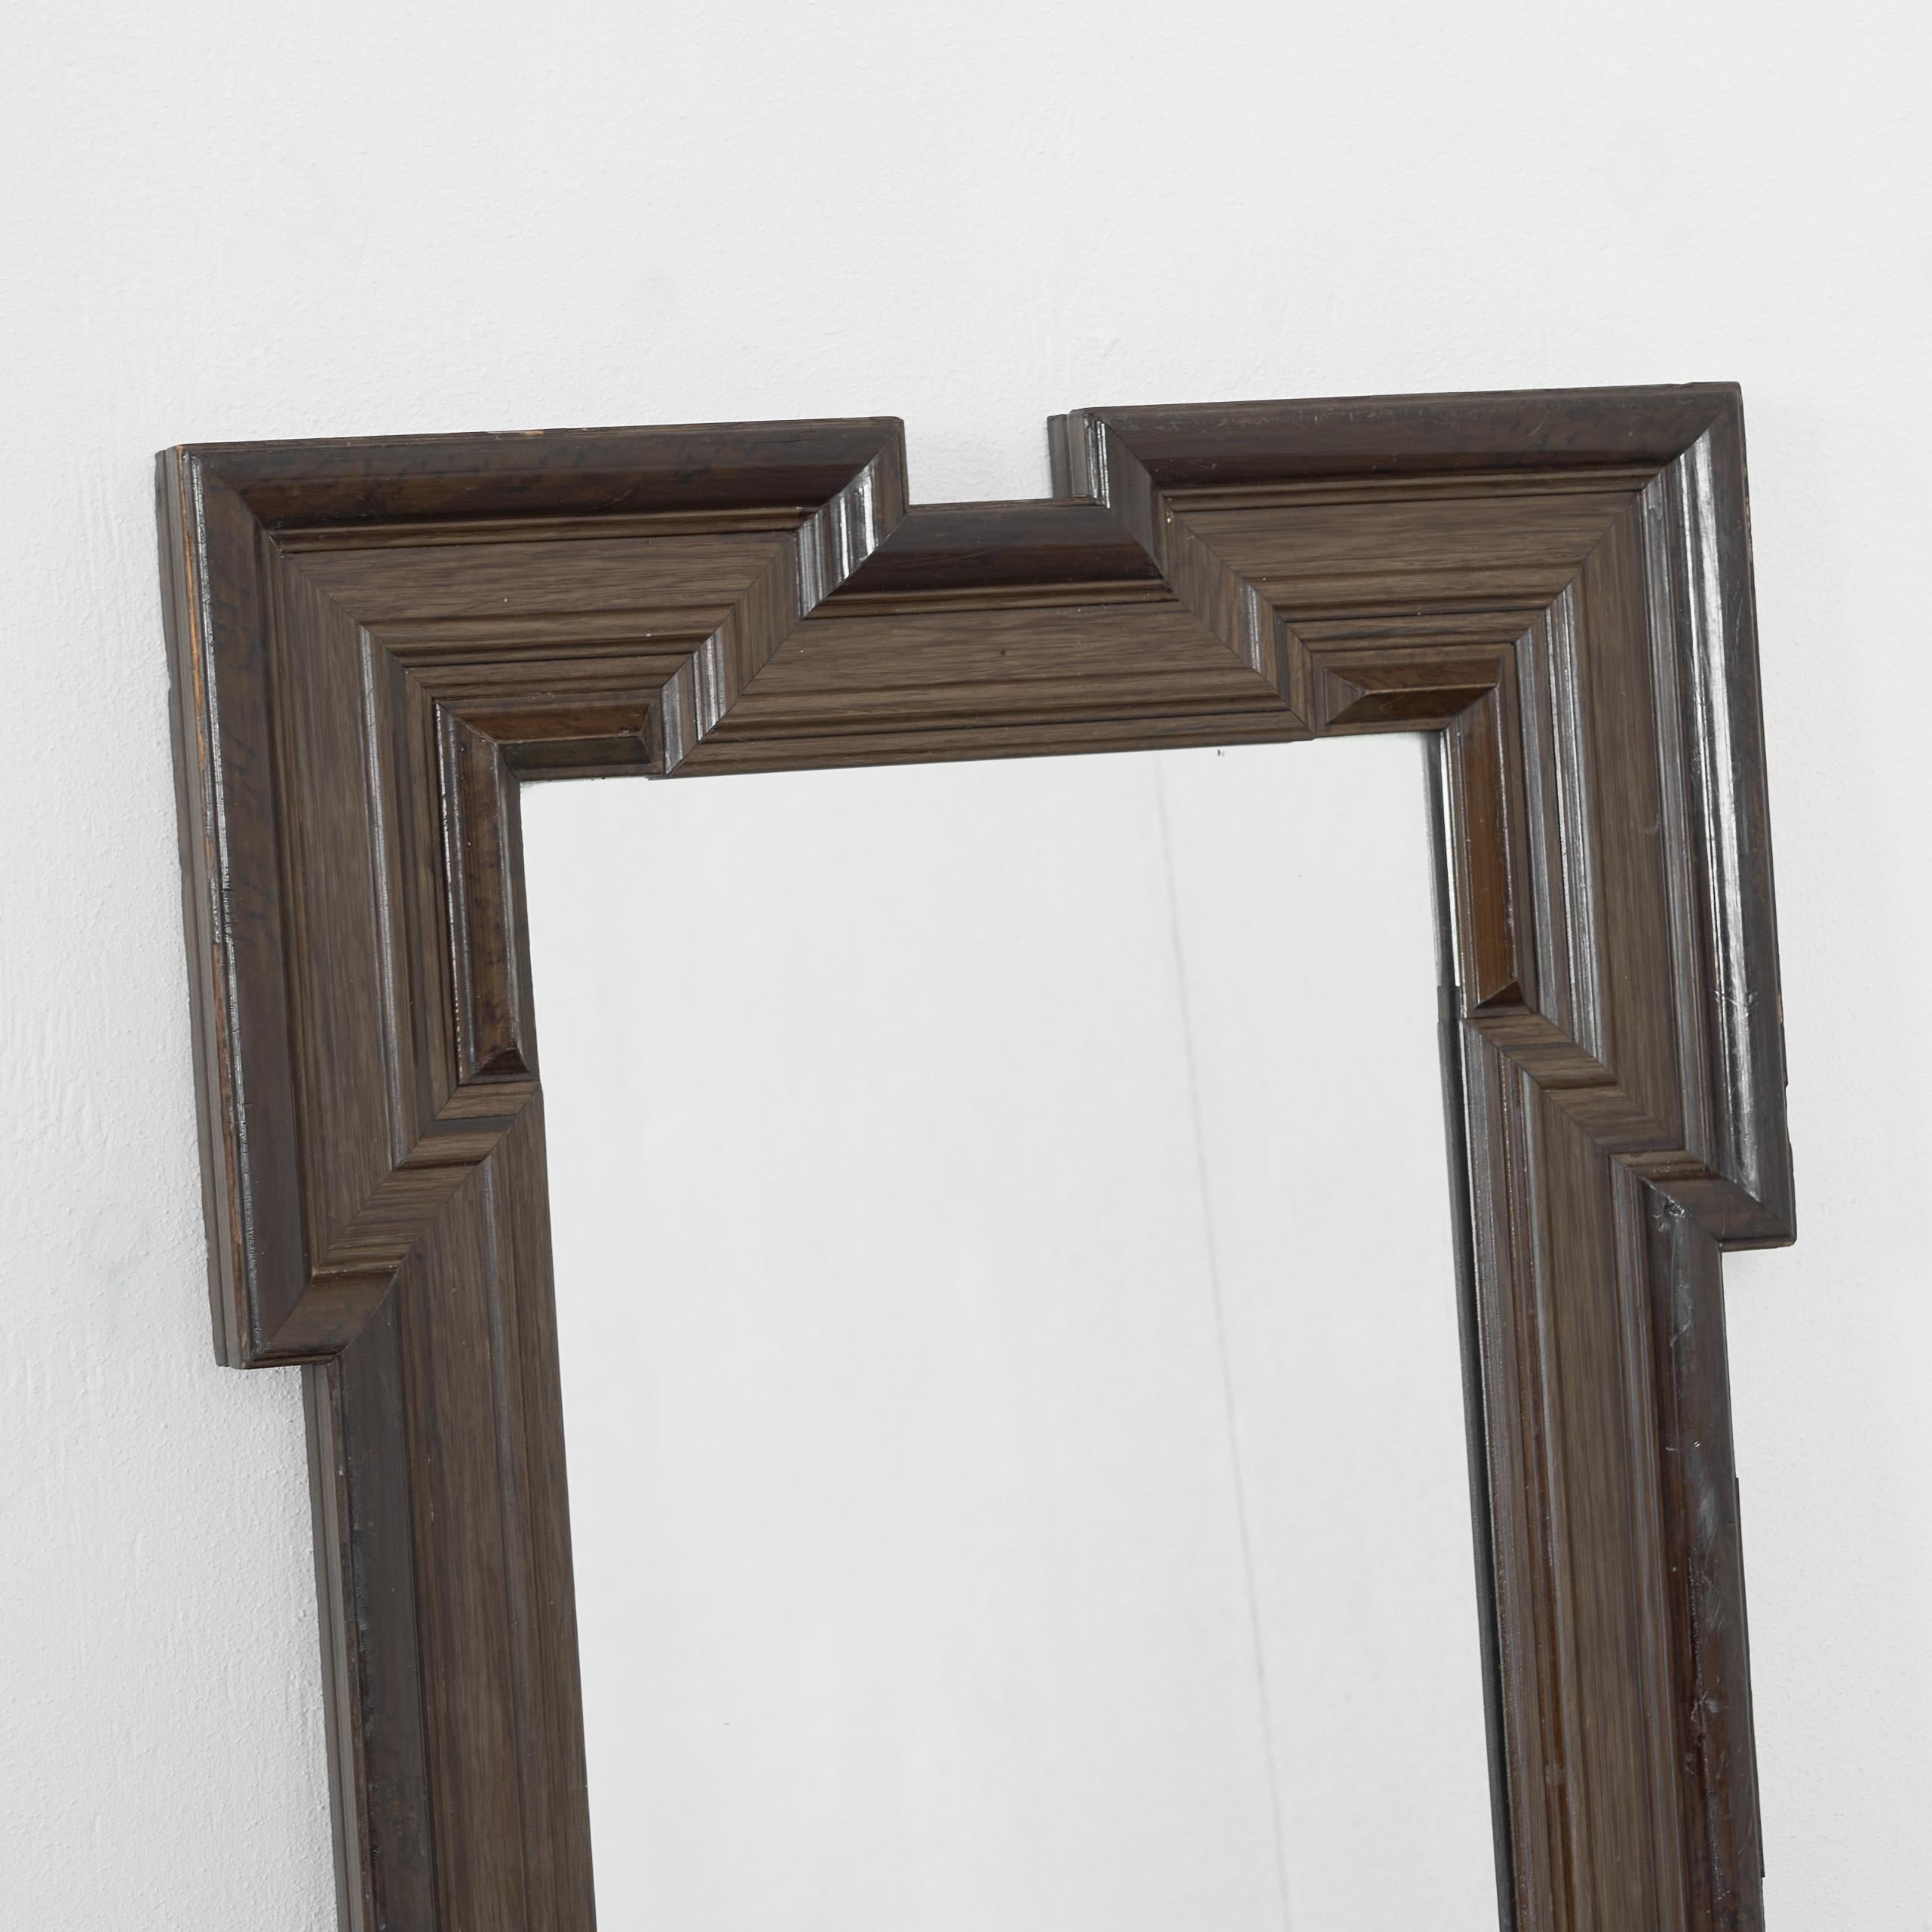 Hand-Crafted Art Deco Mirror in Carved Wood 1930s For Sale